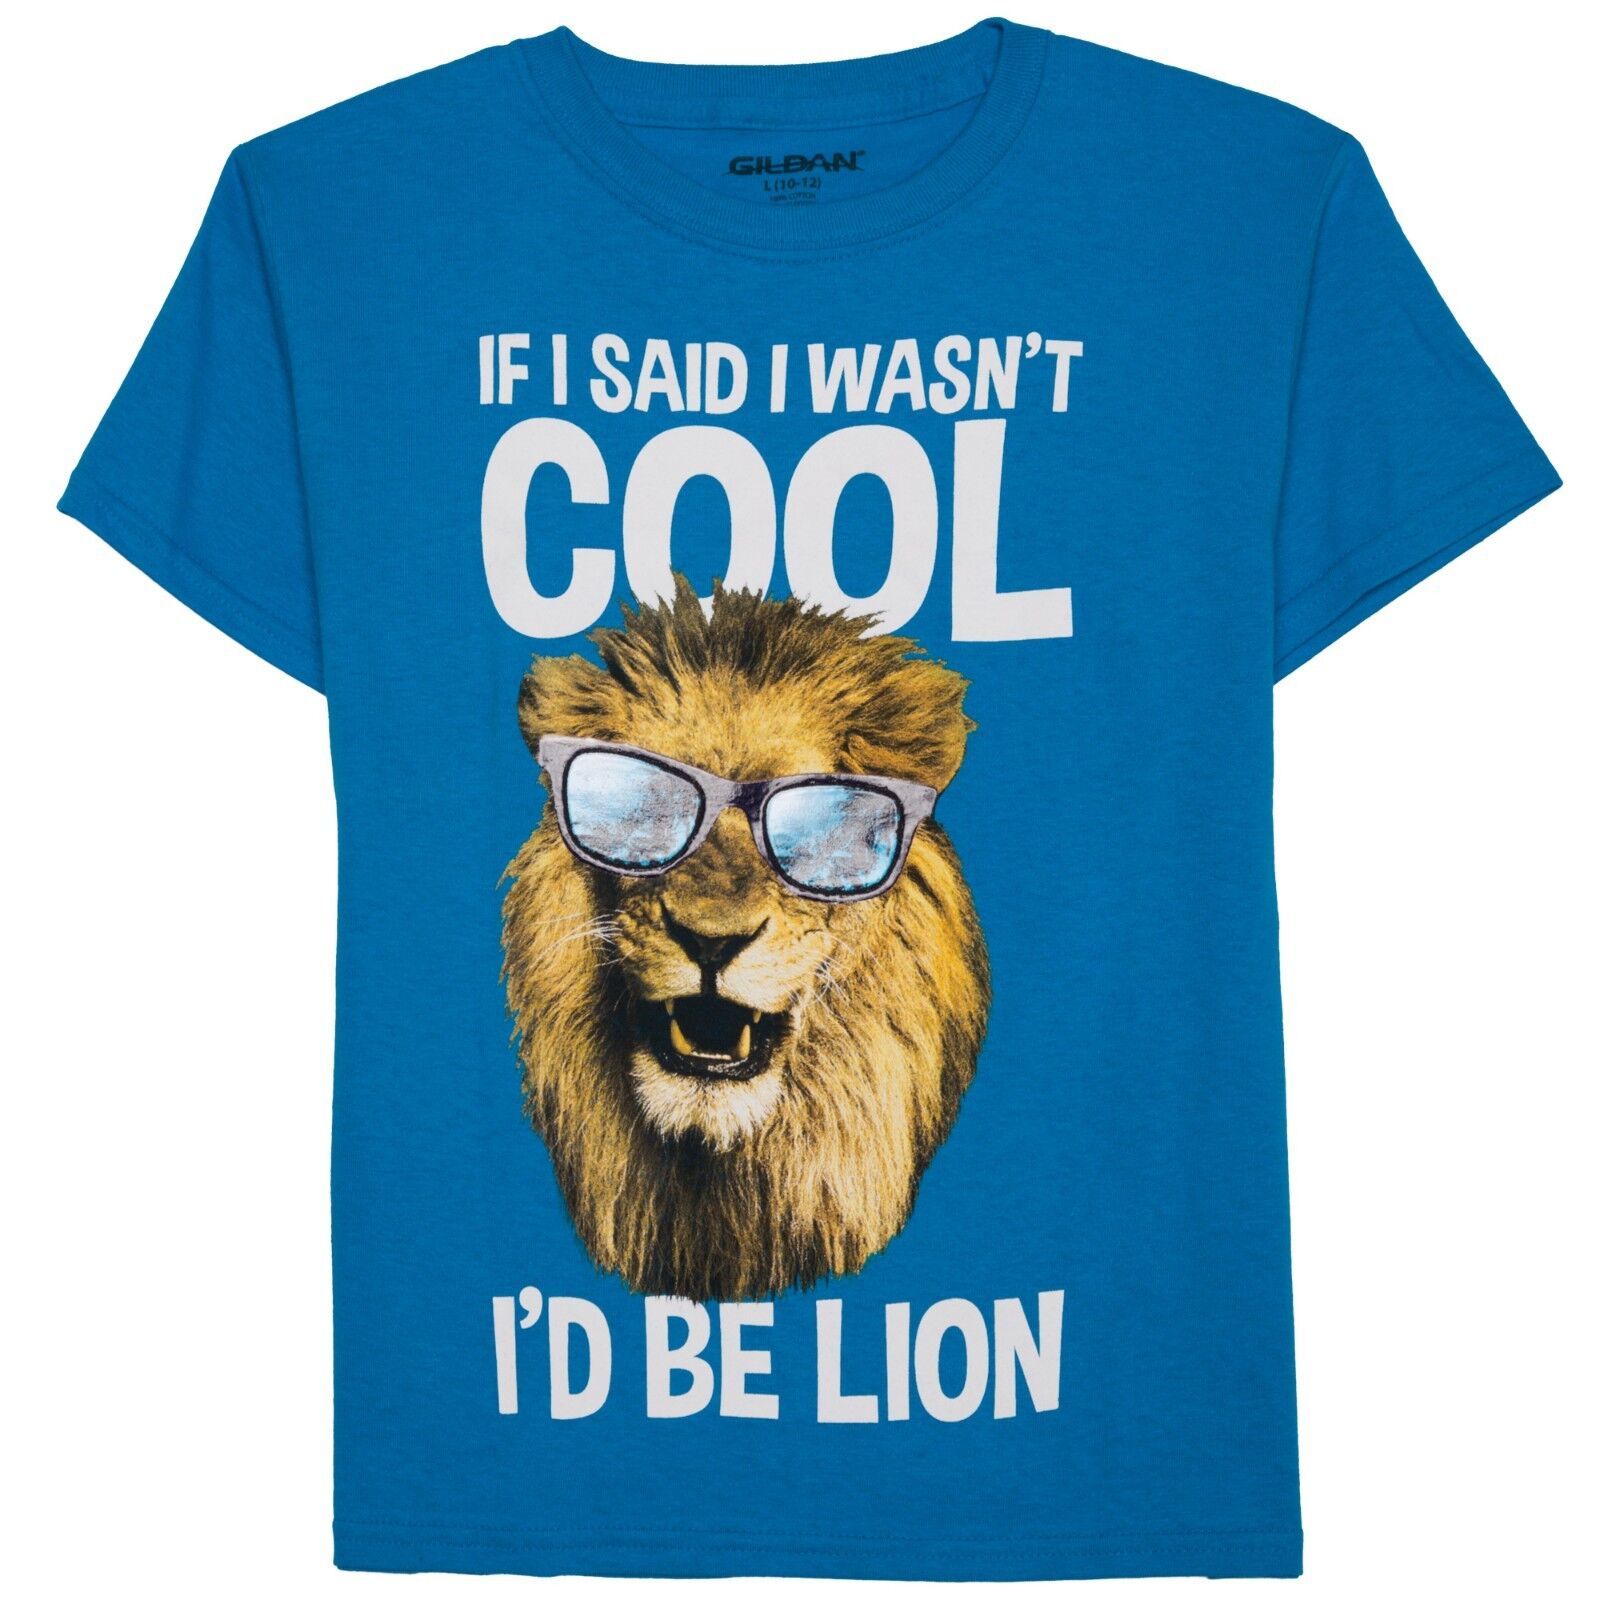 Primary image for Gildan Boy's T Shirt If I Said I Wasn't Cool I Would Be Lion Size X-Large Blue